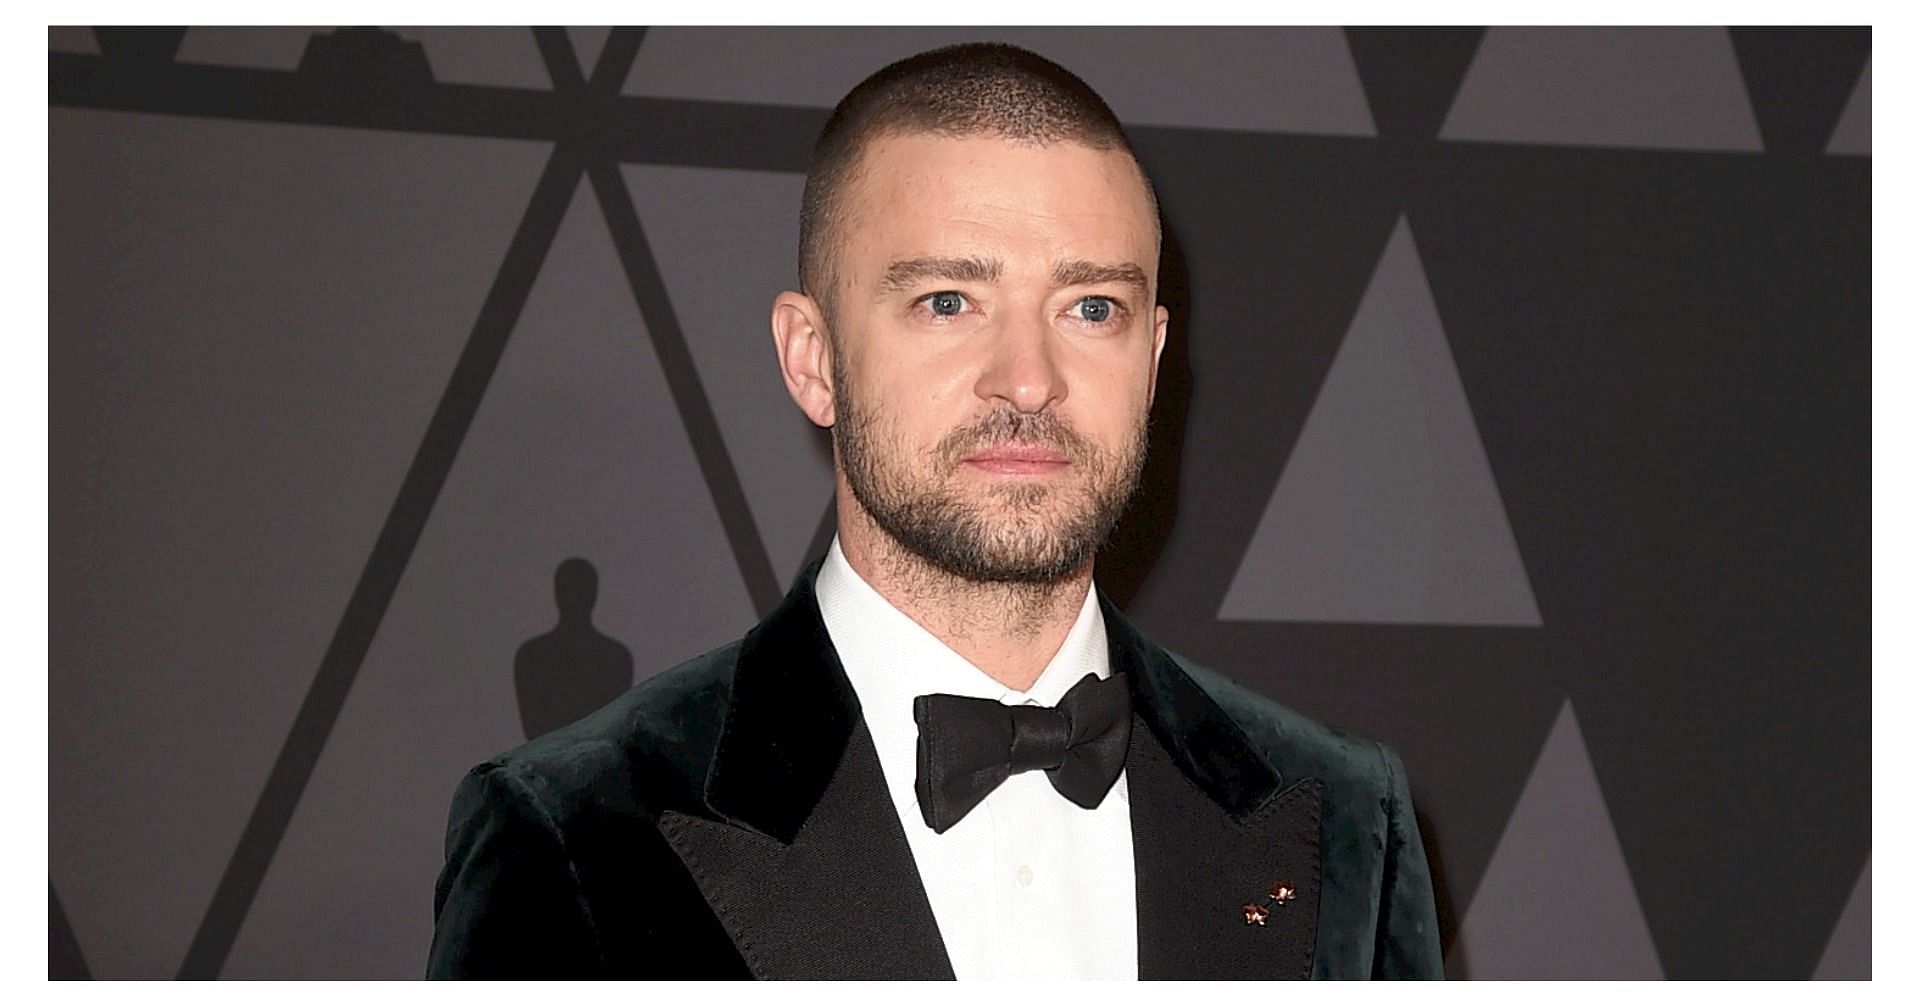 Justin Timberlake's TikTok debut leaves the internet divided: 'Justice for  Janet' and 'Apologize to Britney' trends in his video's comment section